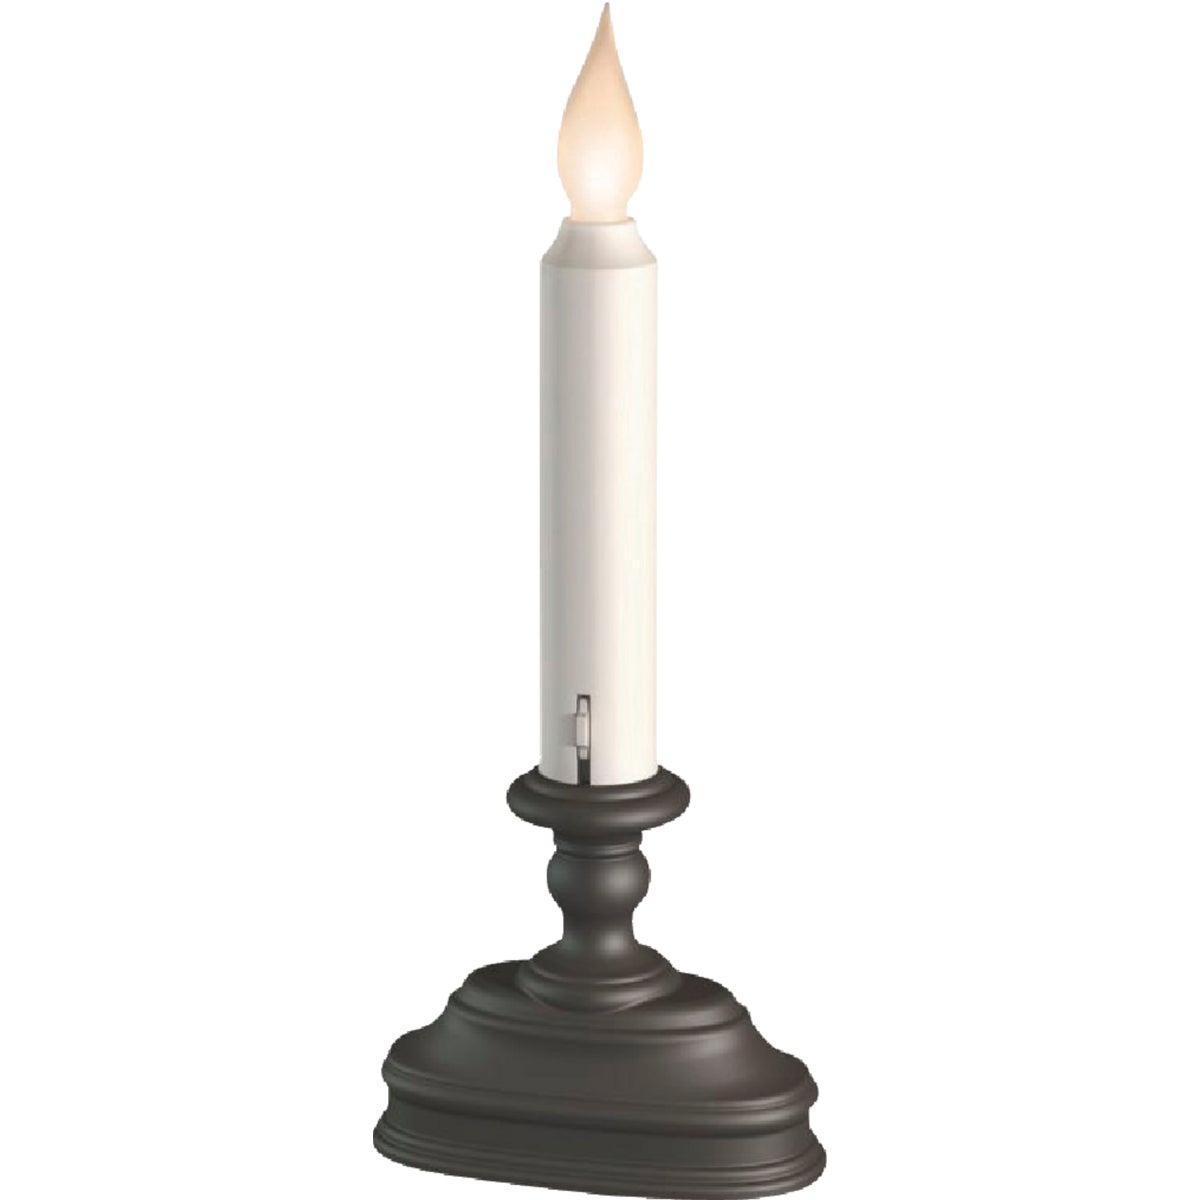 Item 904260, Warm white LED (light emitting diode) traditional battery operated candle.